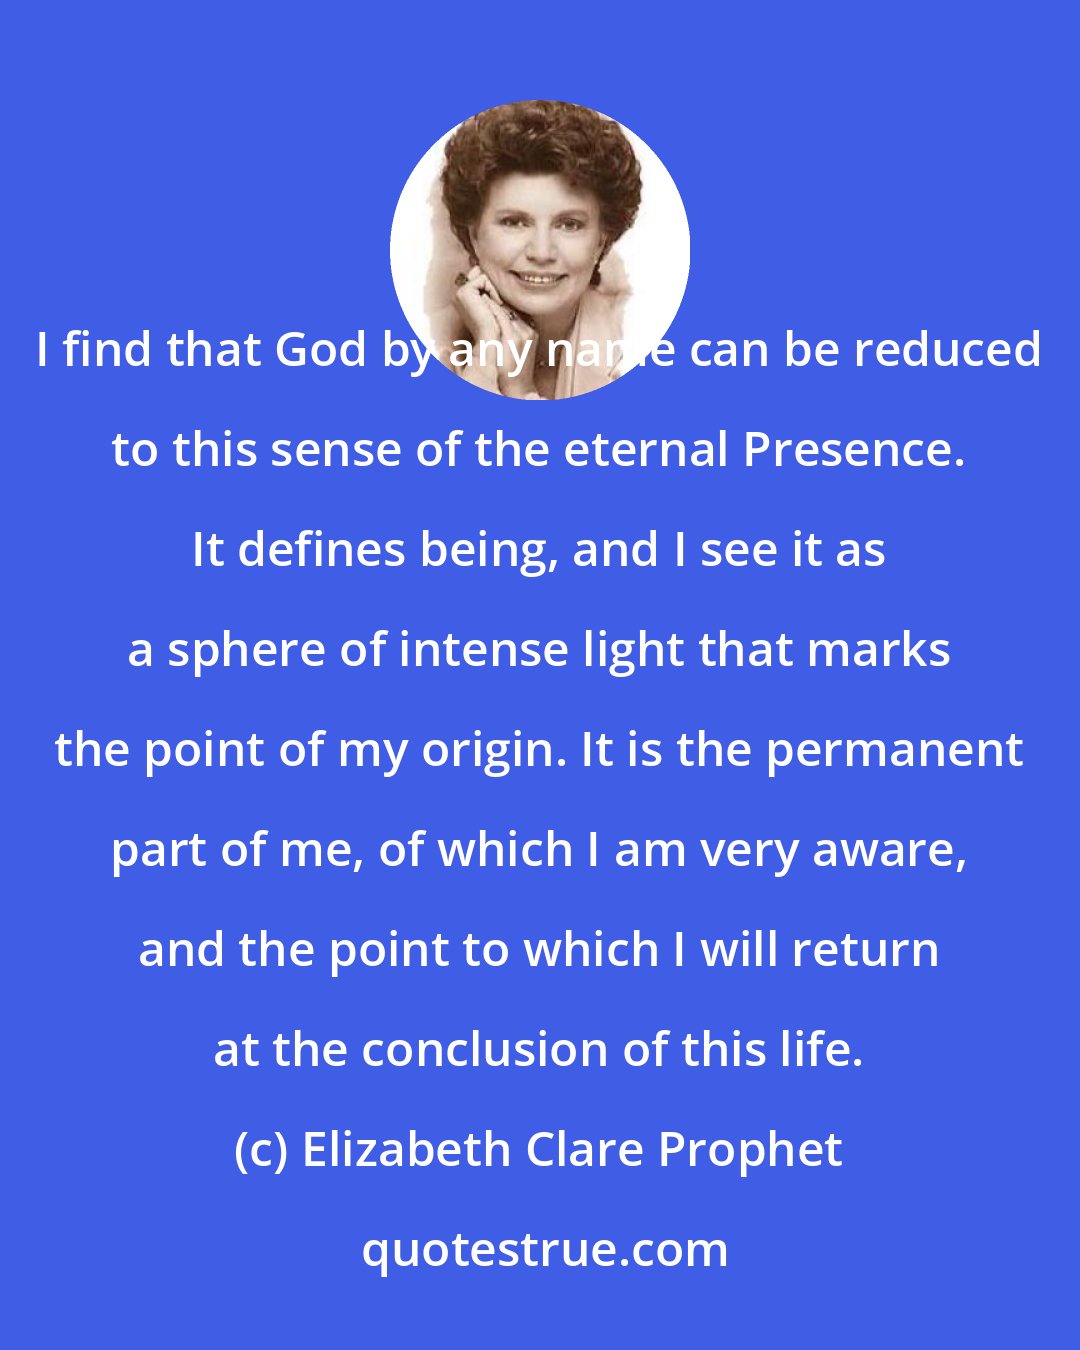 Elizabeth Clare Prophet: I find that God by any name can be reduced to this sense of the eternal Presence. It defines being, and I see it as a sphere of intense light that marks the point of my origin. It is the permanent part of me, of which I am very aware, and the point to which I will return at the conclusion of this life.